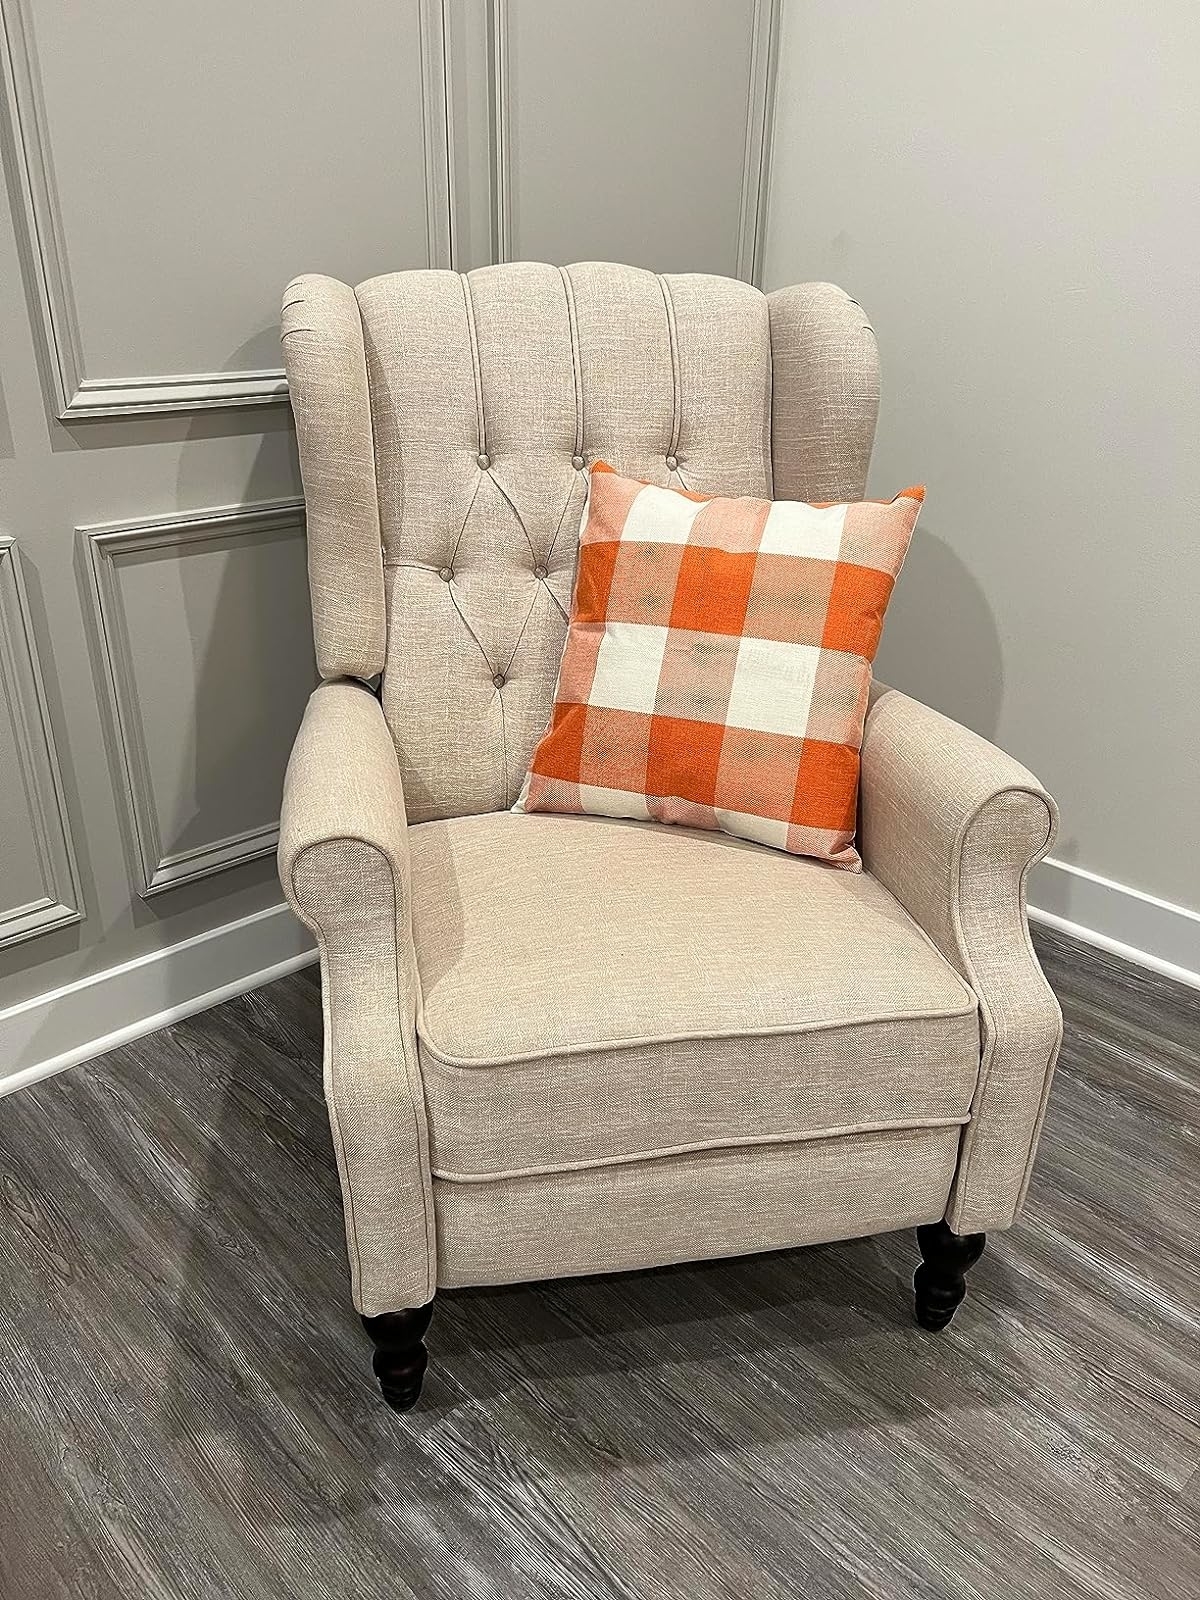 Reviewer image of the orange and cream plaid pillow on a beige armchair